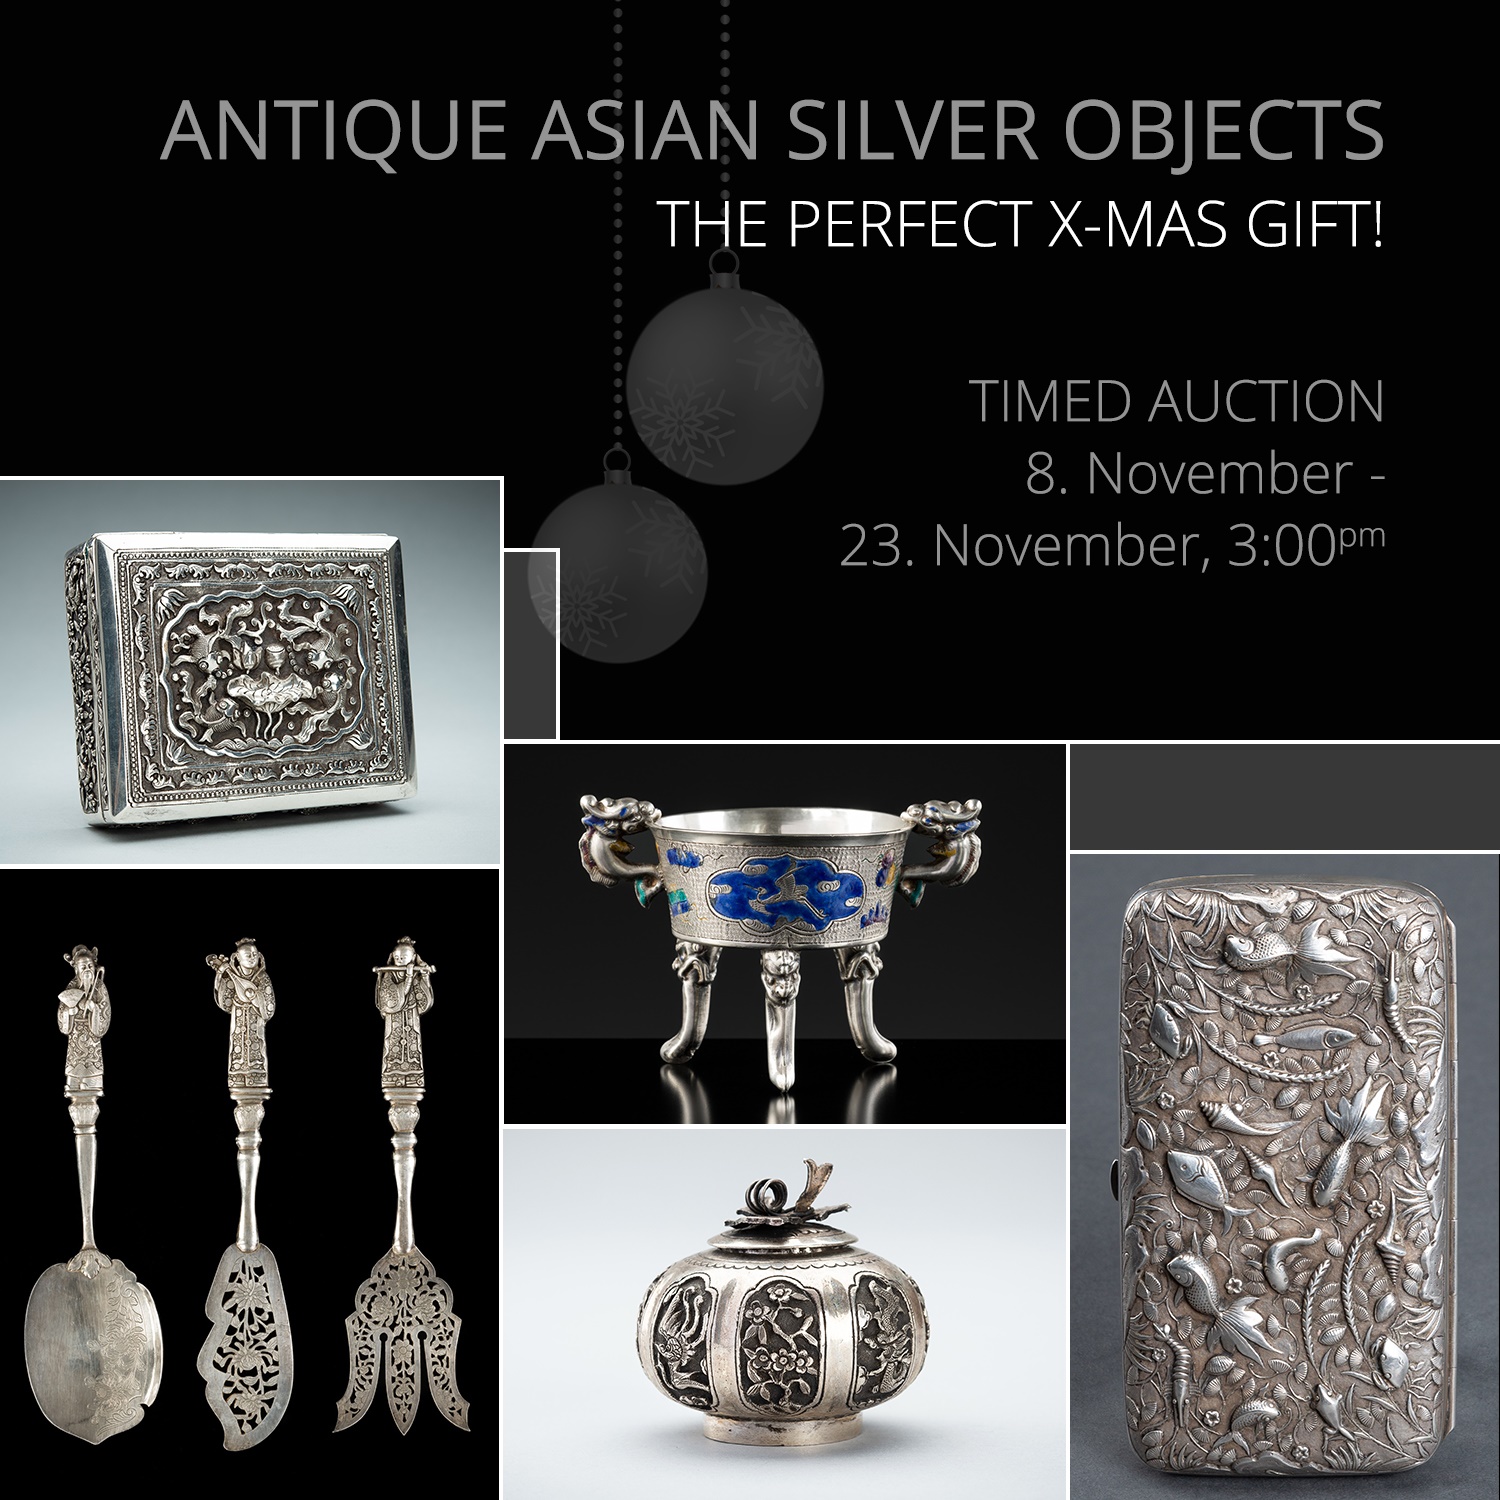 ANTIQUE ASIAN SILVER OBJECTS – THE PERFECT X-MAS GIFT! 